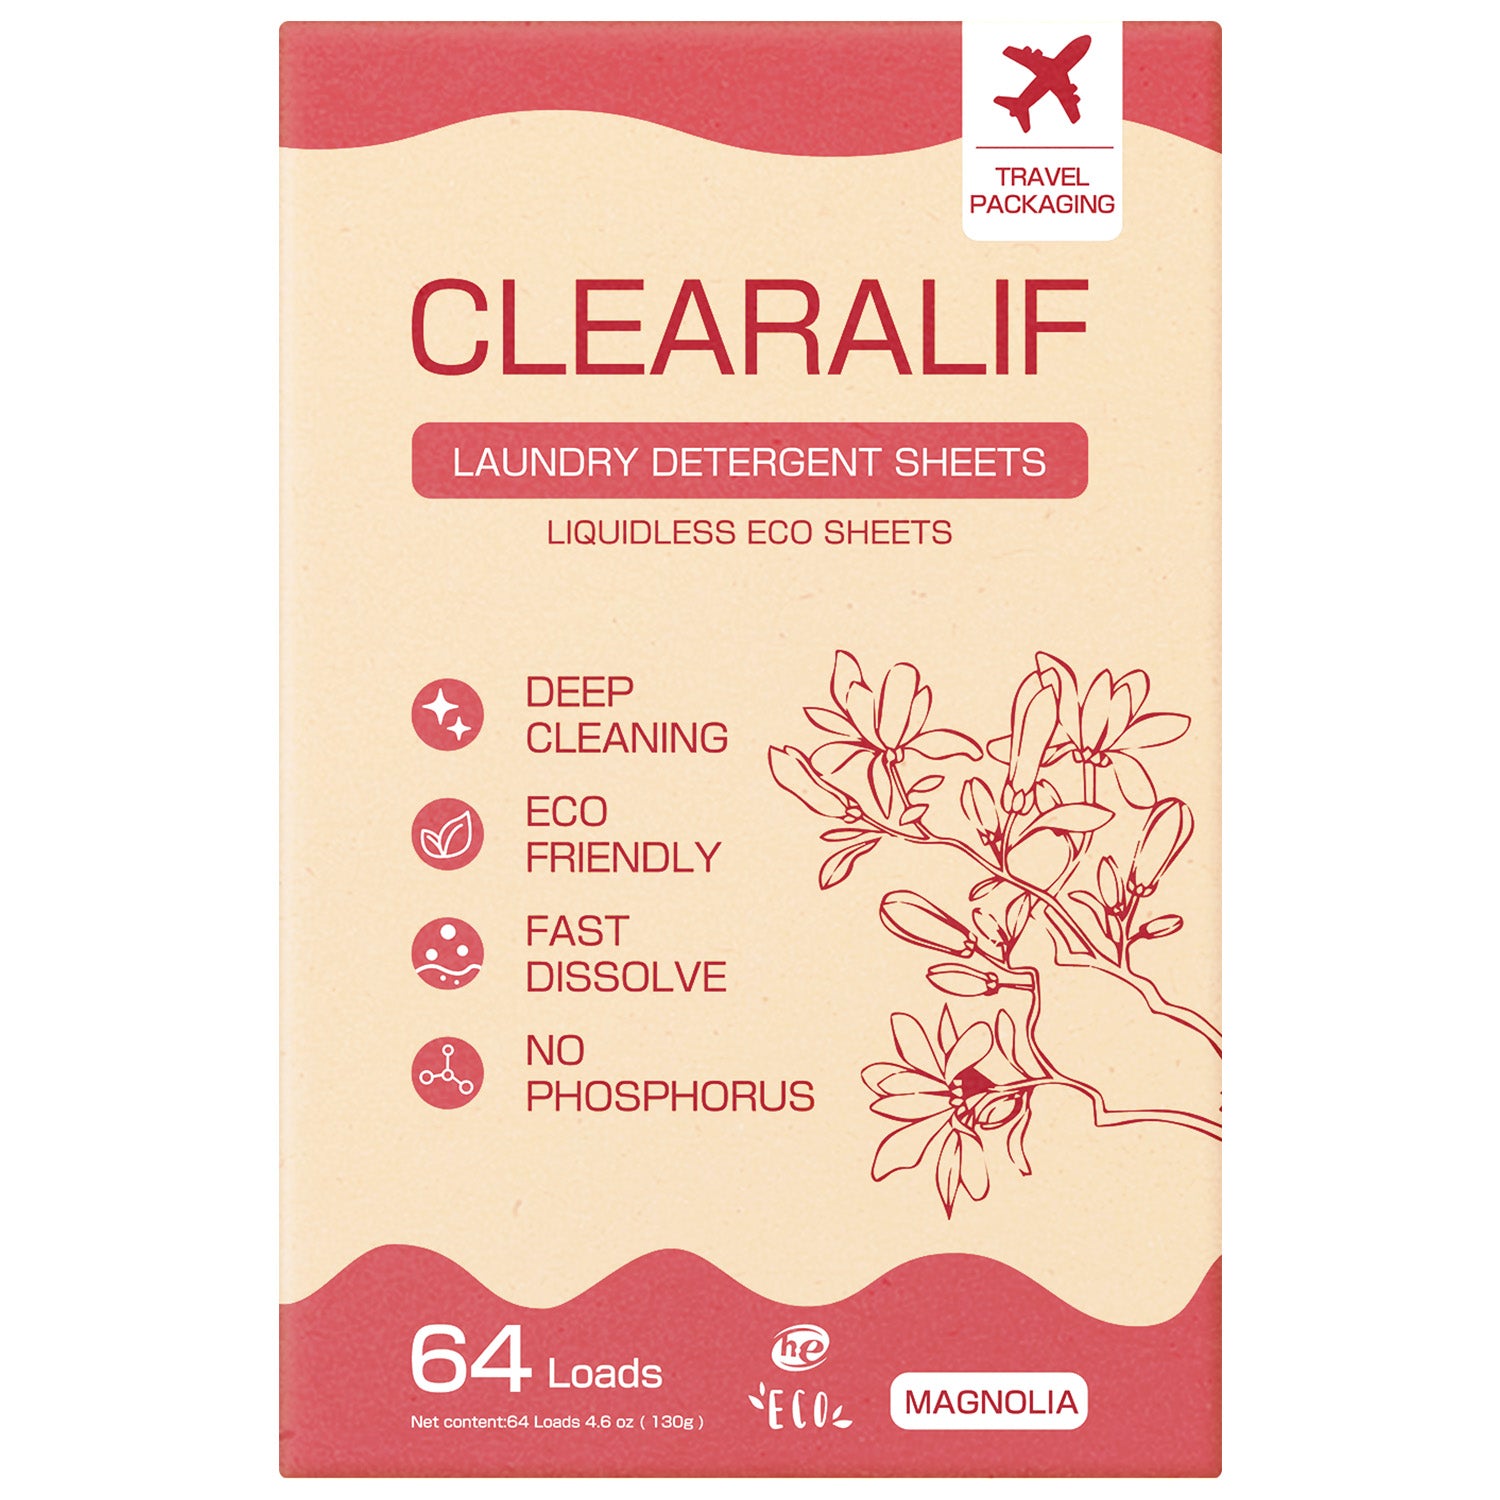 CLEARALIF Eco Friendly & Hypoallergenic Laundry Detergent Sheets 64 Loads, Magnolia